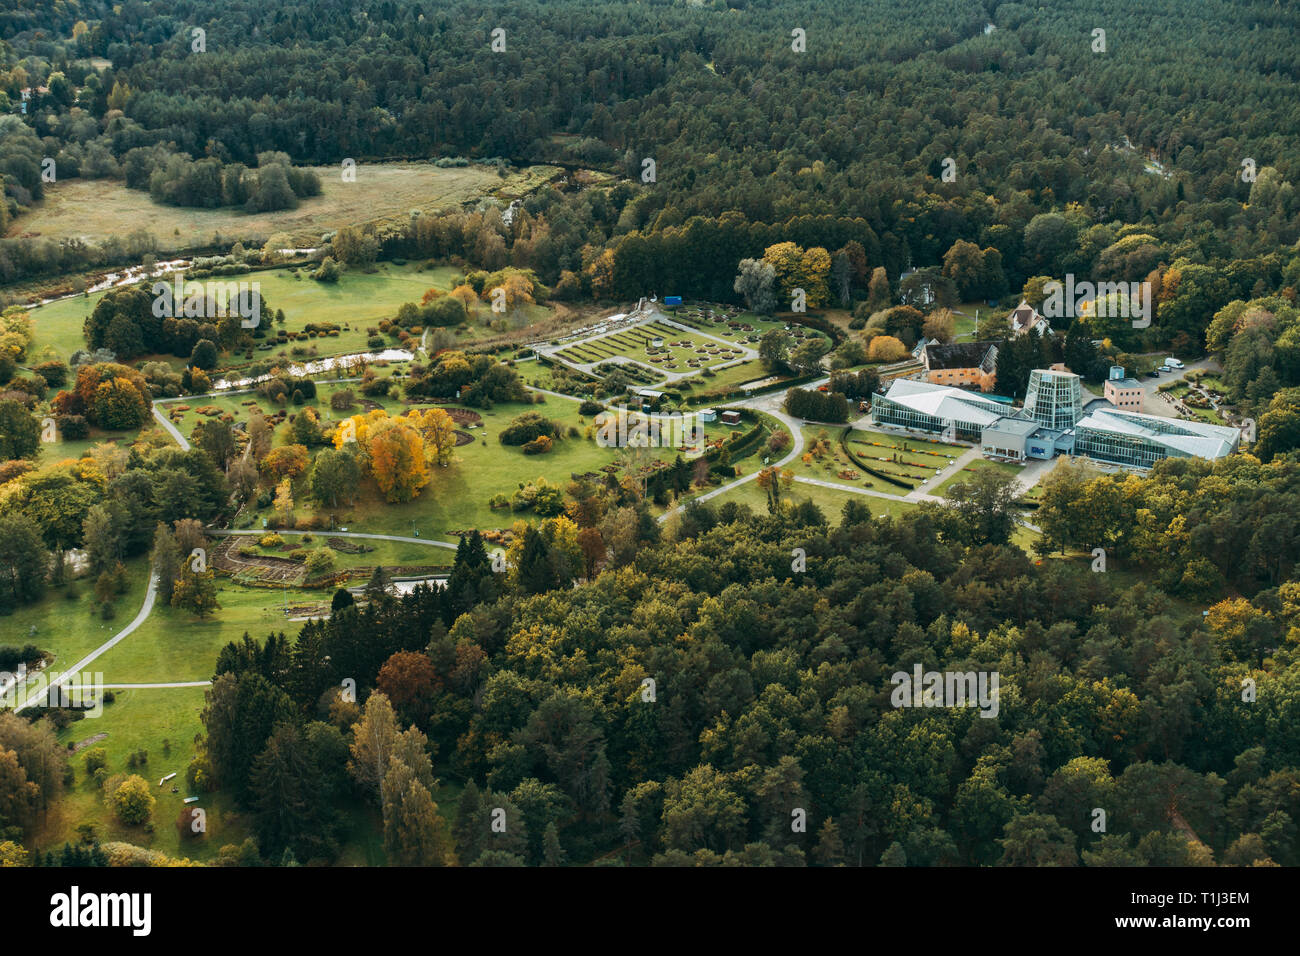 an aerial view of the Tallinn Botanic Garden, showing the lush green forest surrounds Stock Photo